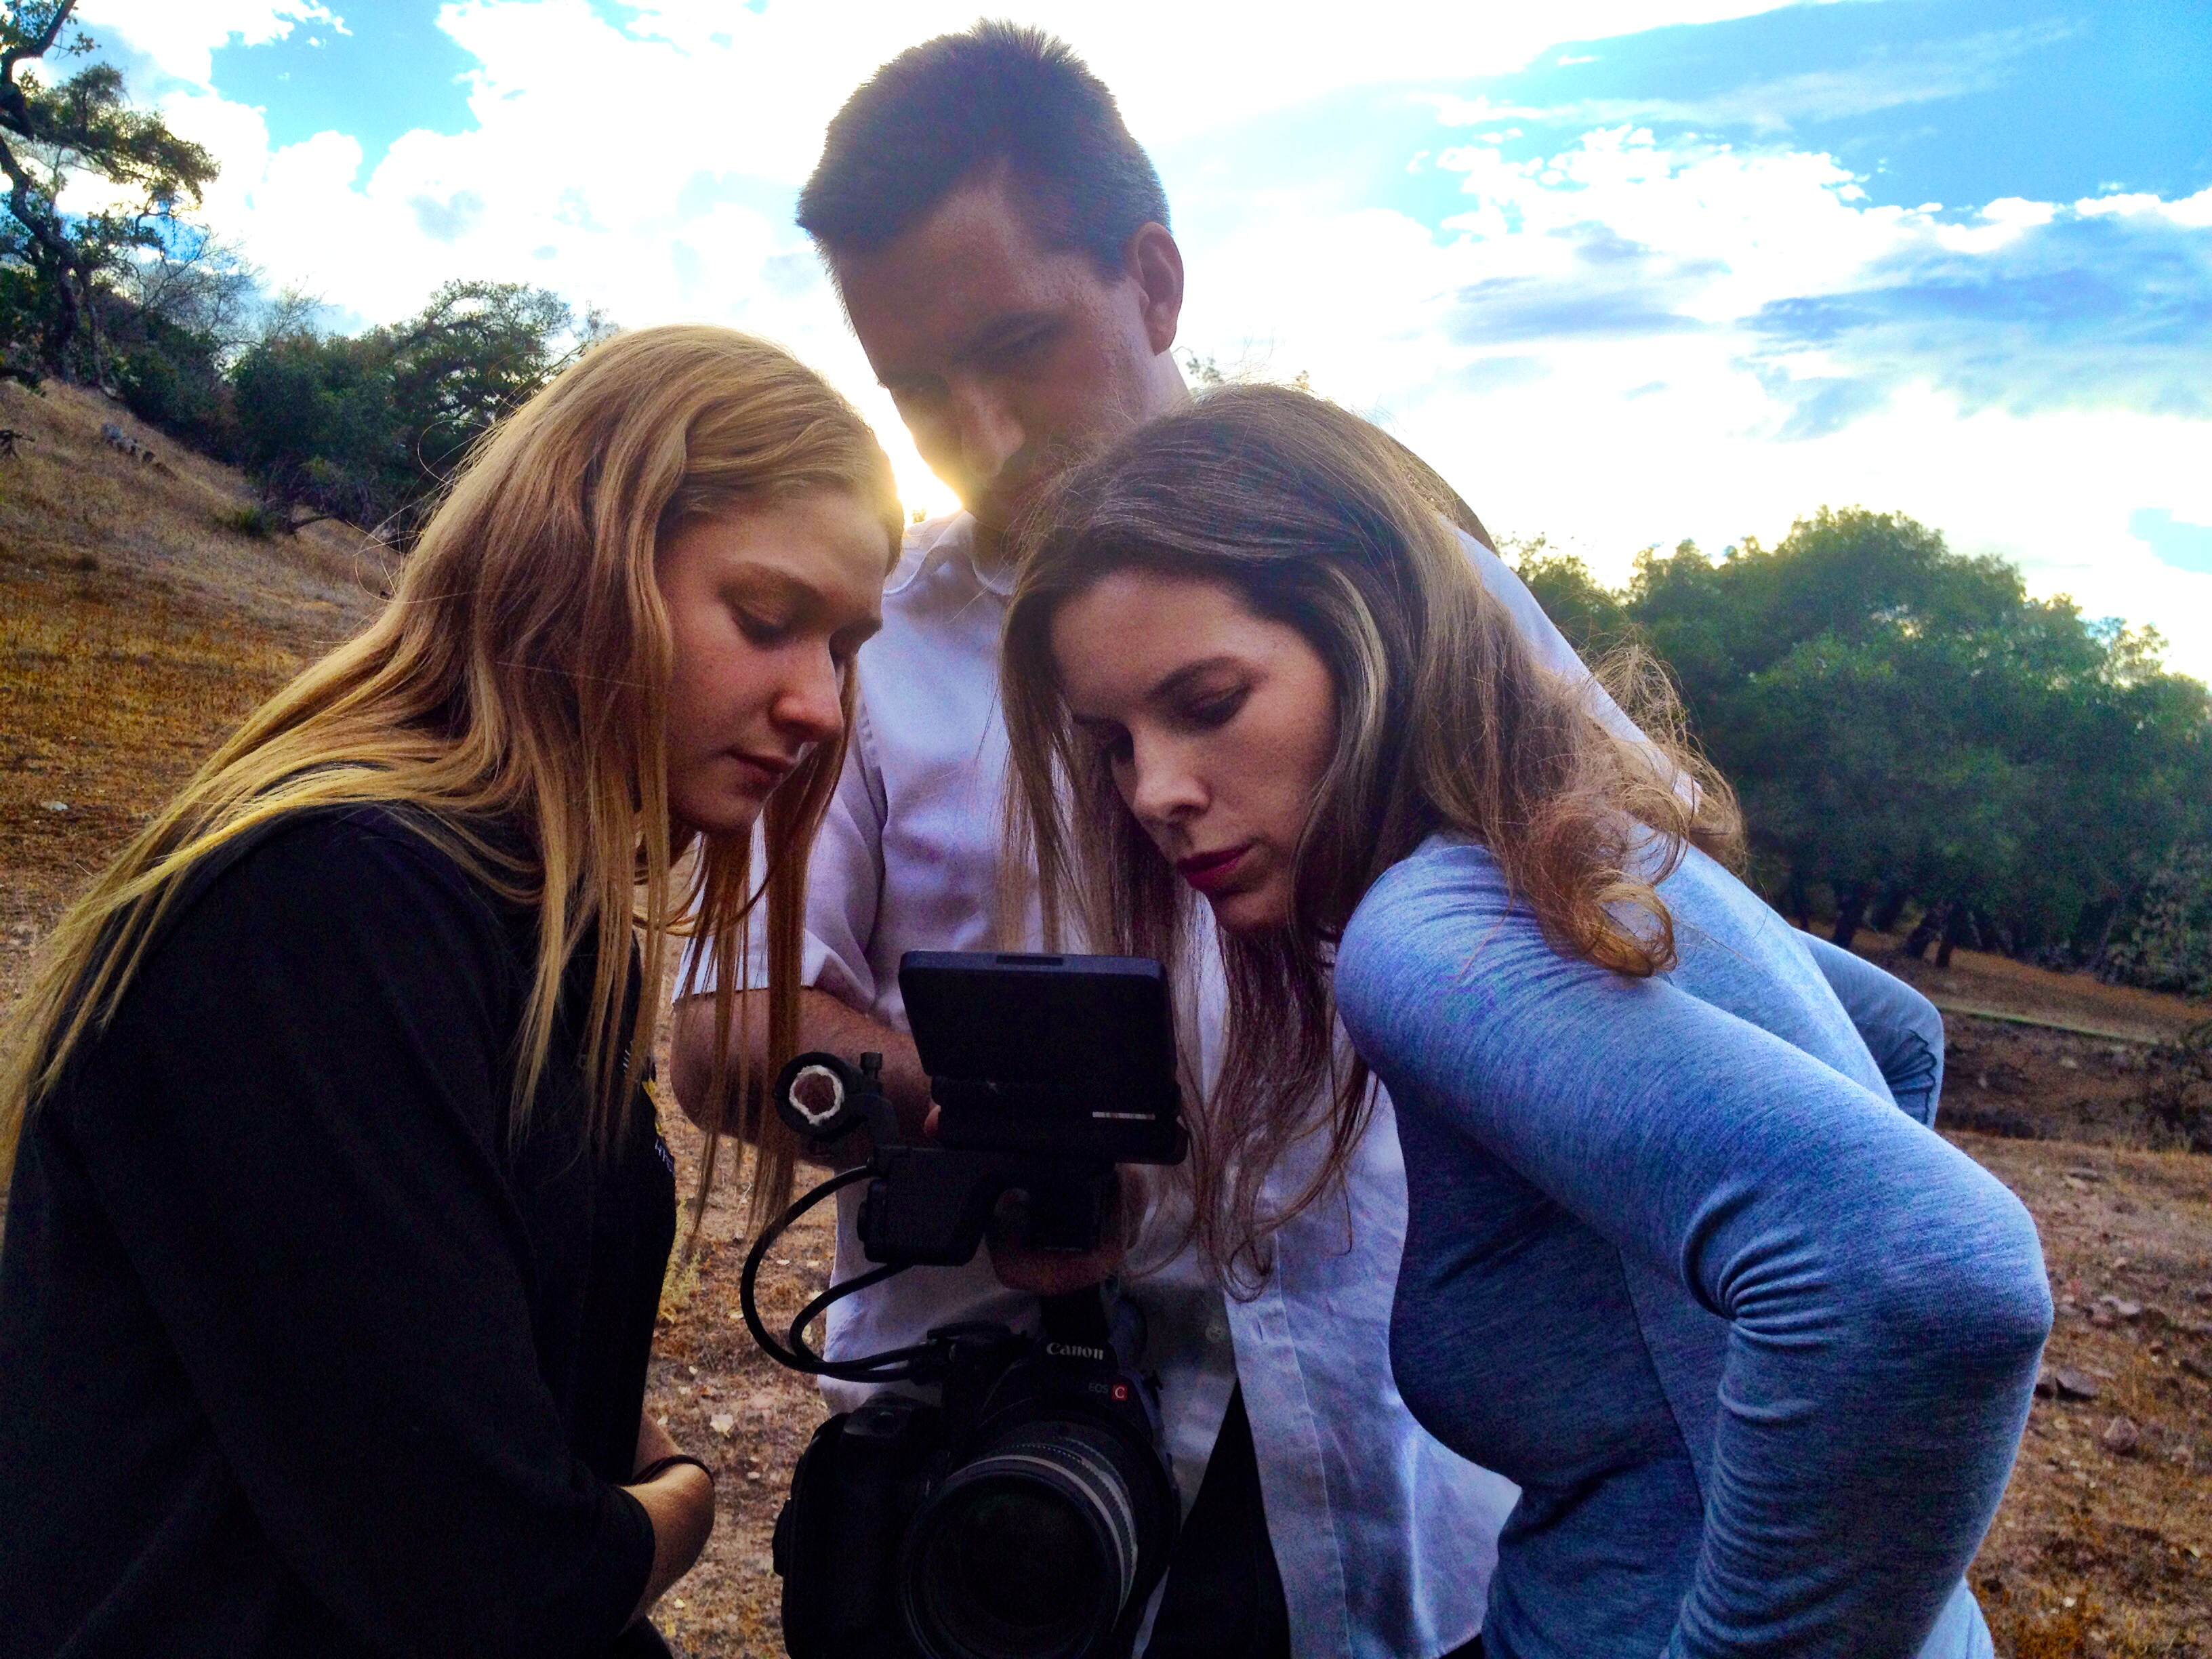 Still of Rya E'met, Tali Tofler and Keefe Swacker in Be Here Now